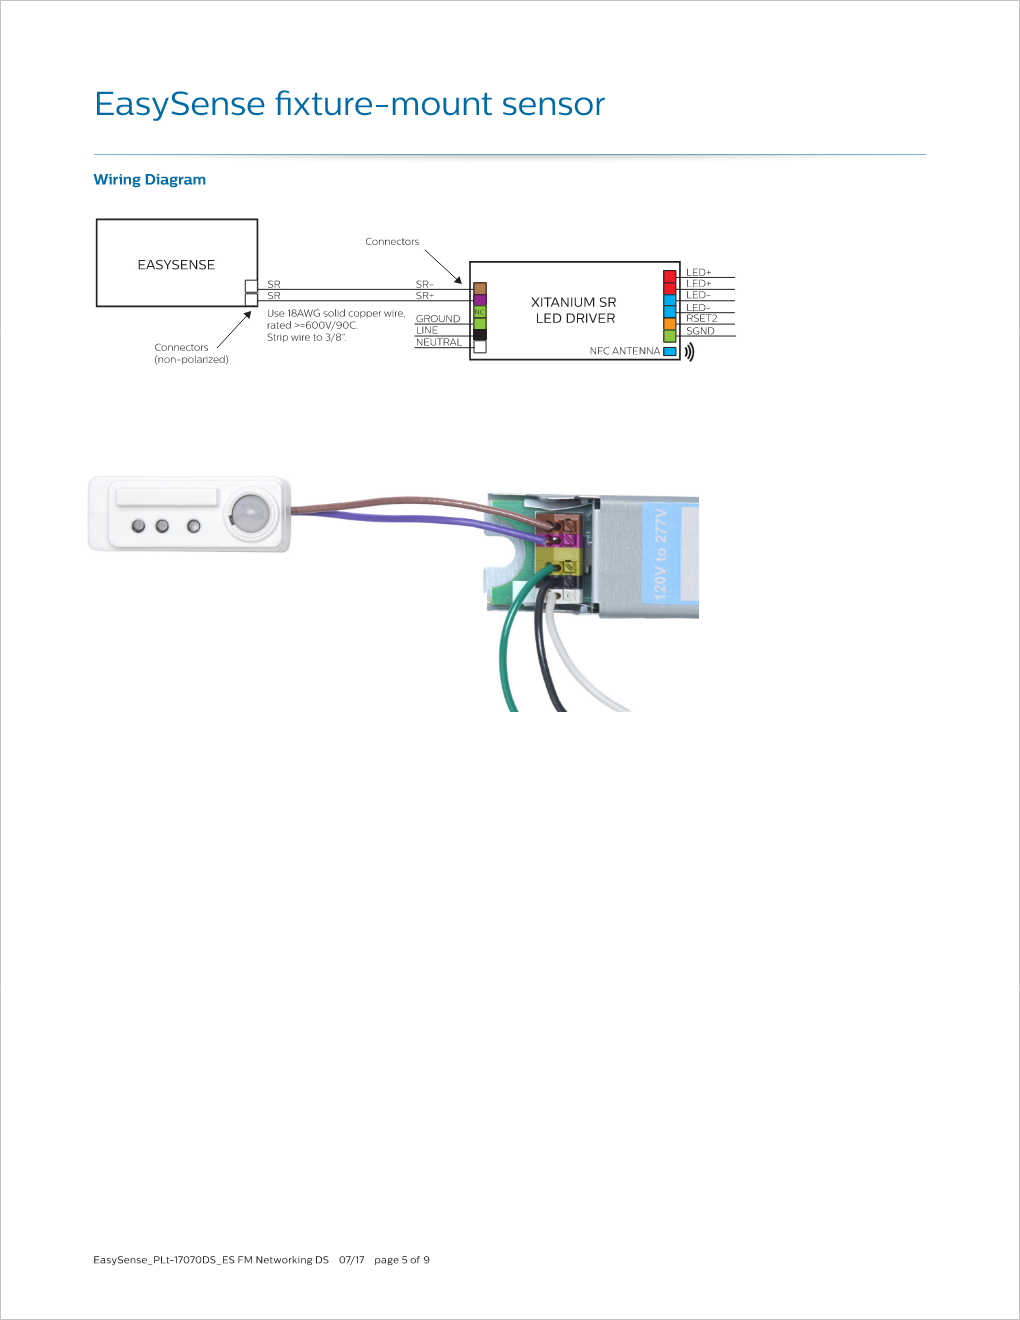 Philips_EasySense_SNS300_Fixture-Mount_for_Networking_Datasheet__PLt-17070DS__Page_005.png